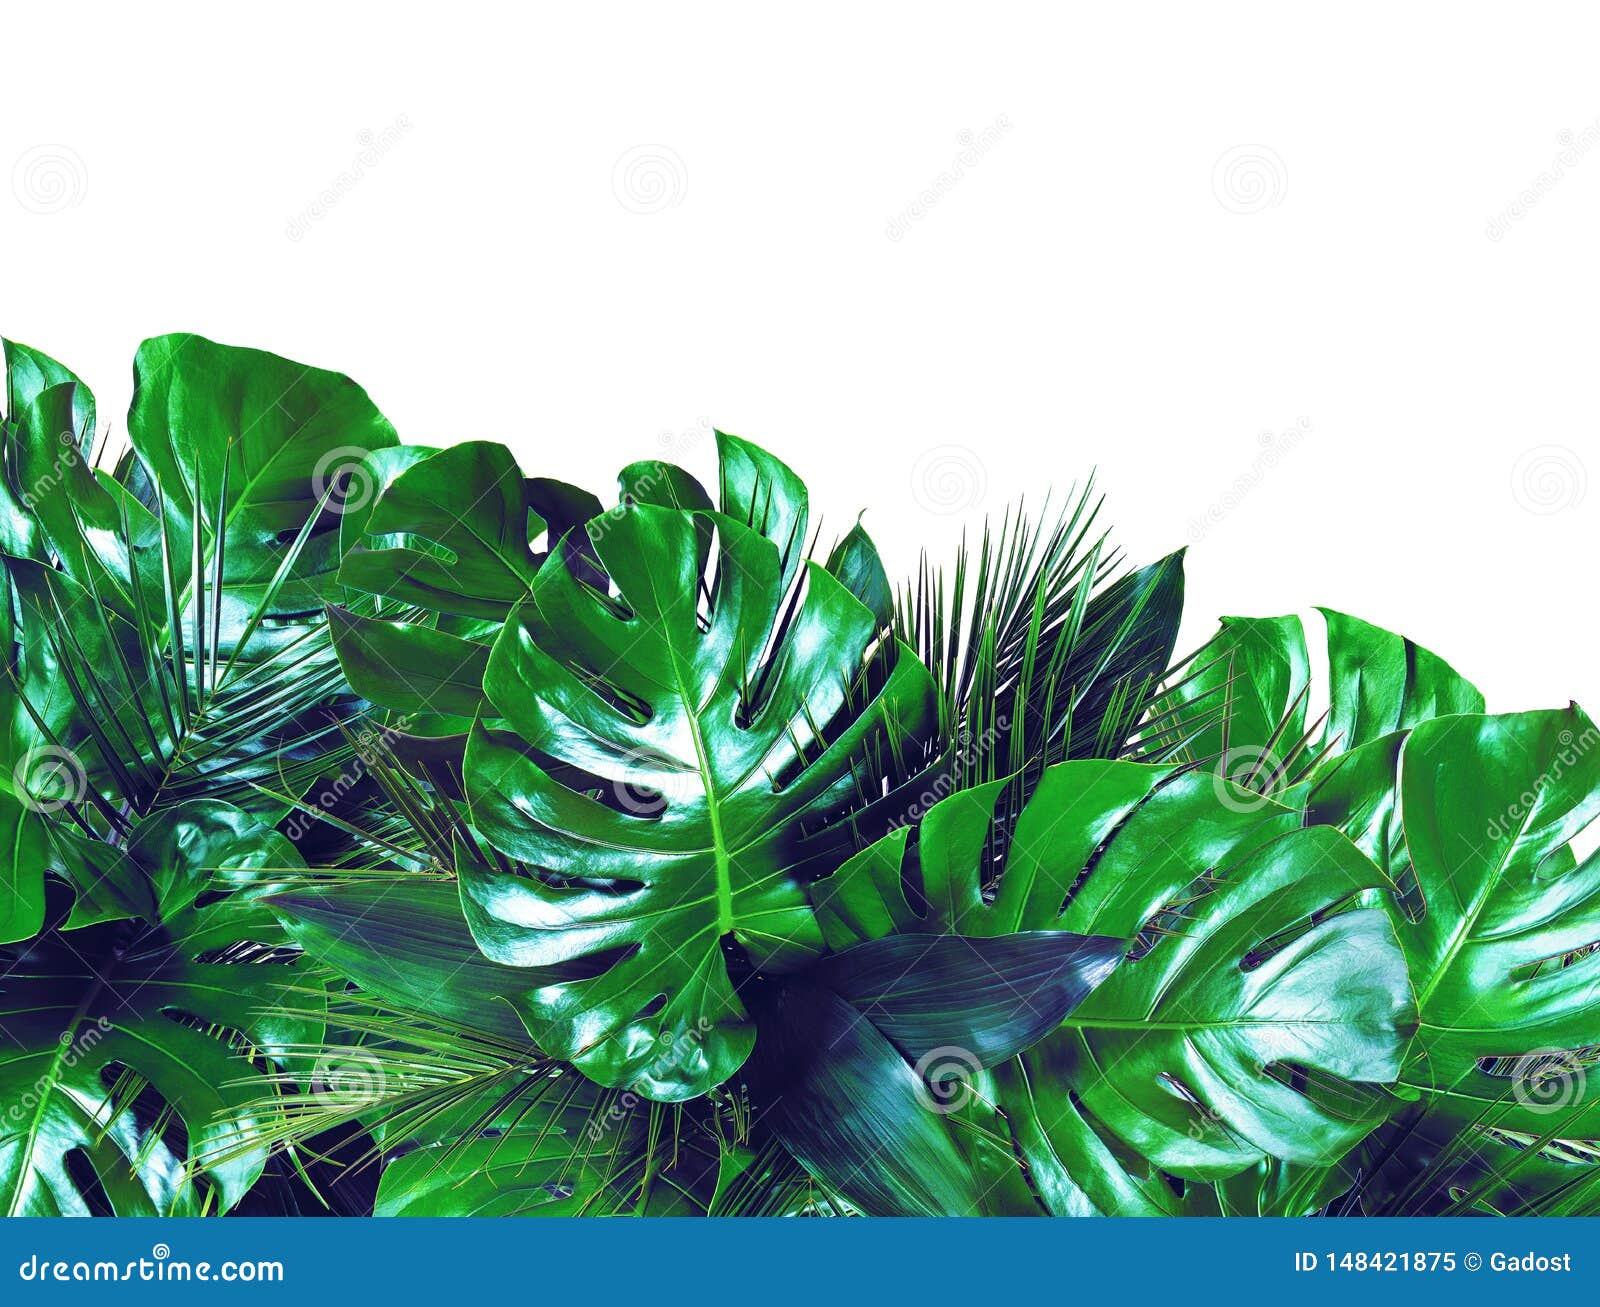 close up of bouquets of various dark green fresh tropical leaves on white background